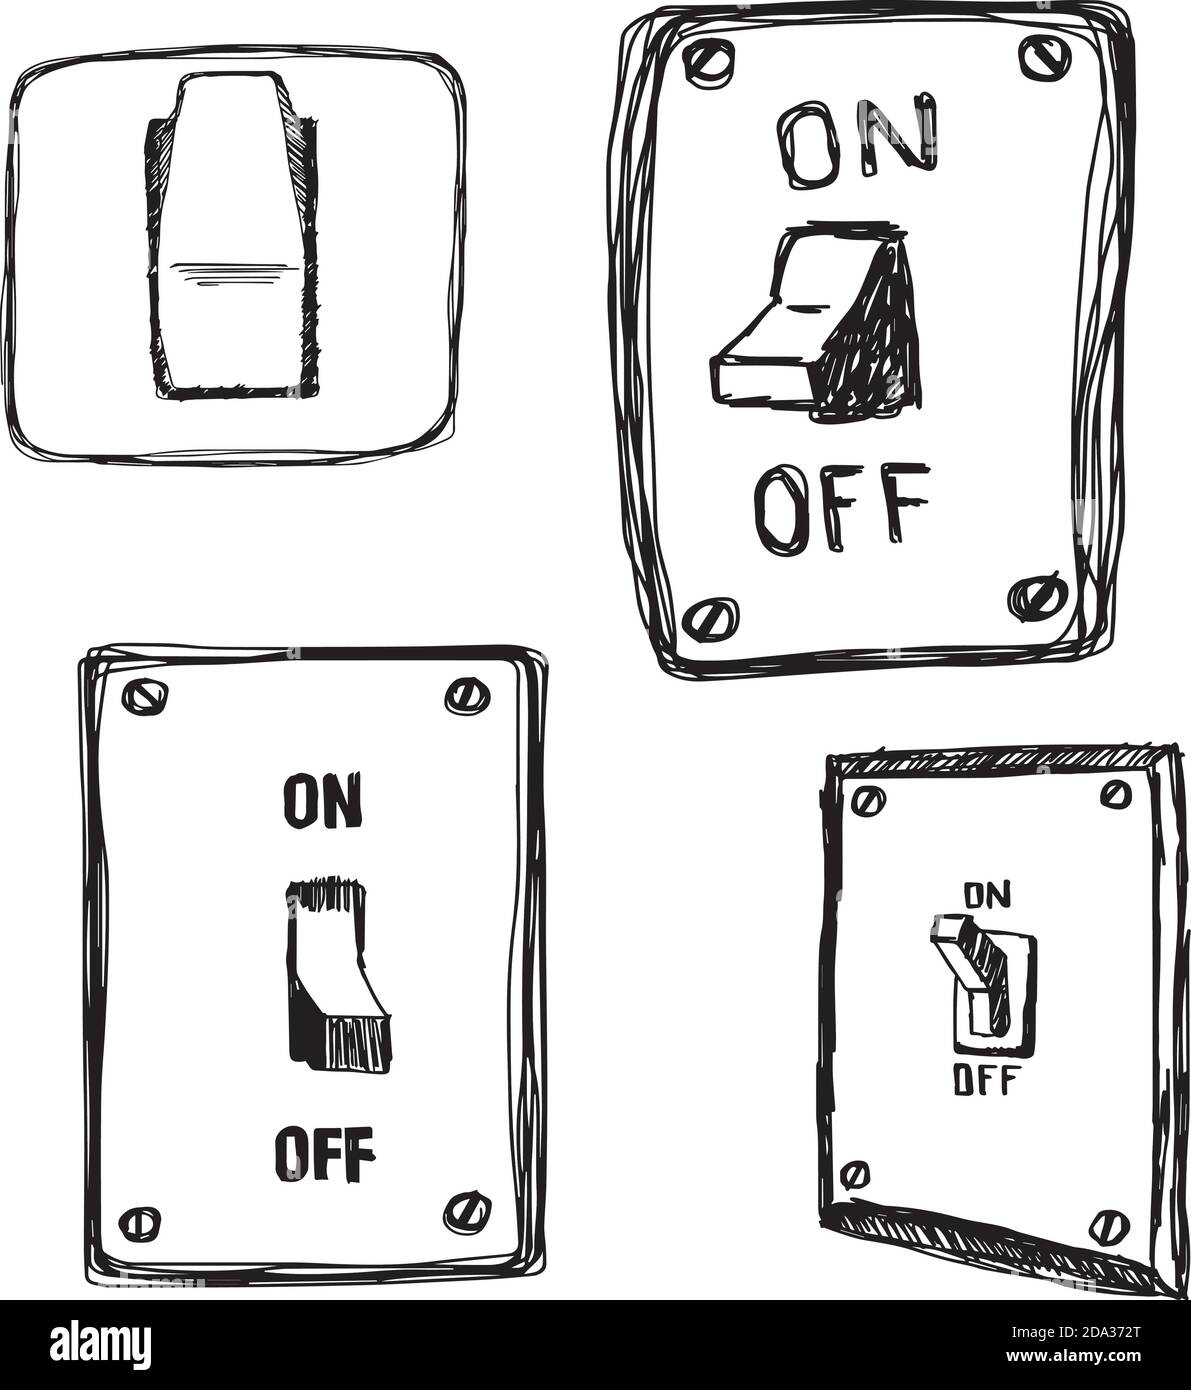 Light Switch Doodle Icon Stock Illustration - Download Image Now